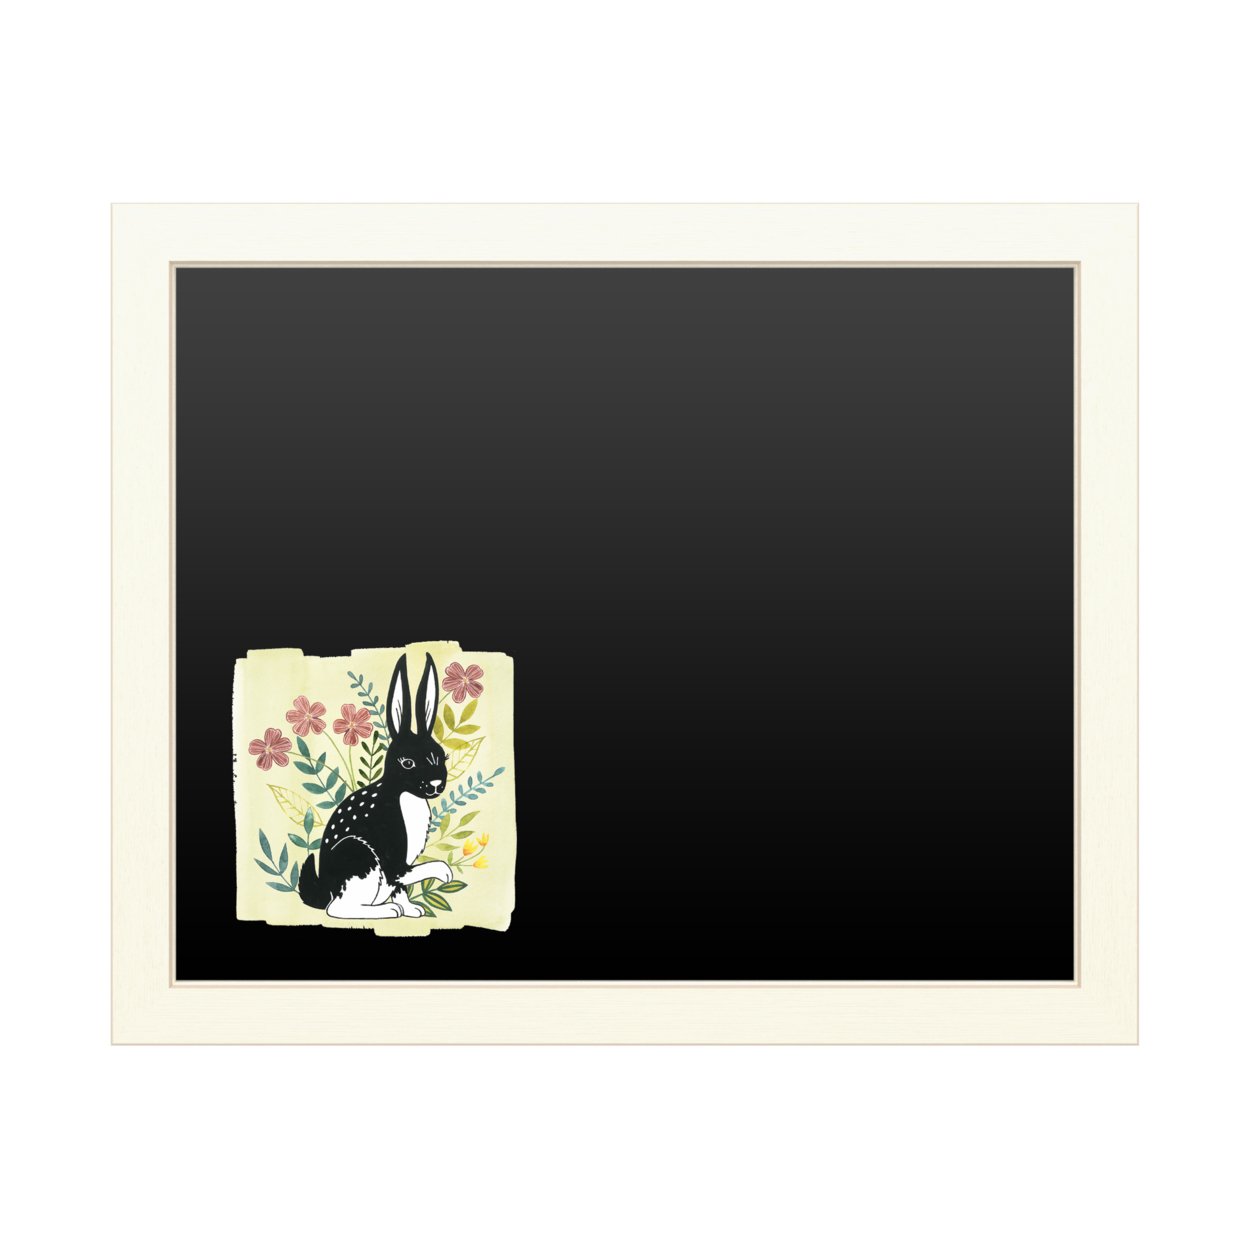 16 X 20 Chalk Board With Printed Artwork - Grace Popp Floral Forester IV White Board - Ready To Hang Chalkboard